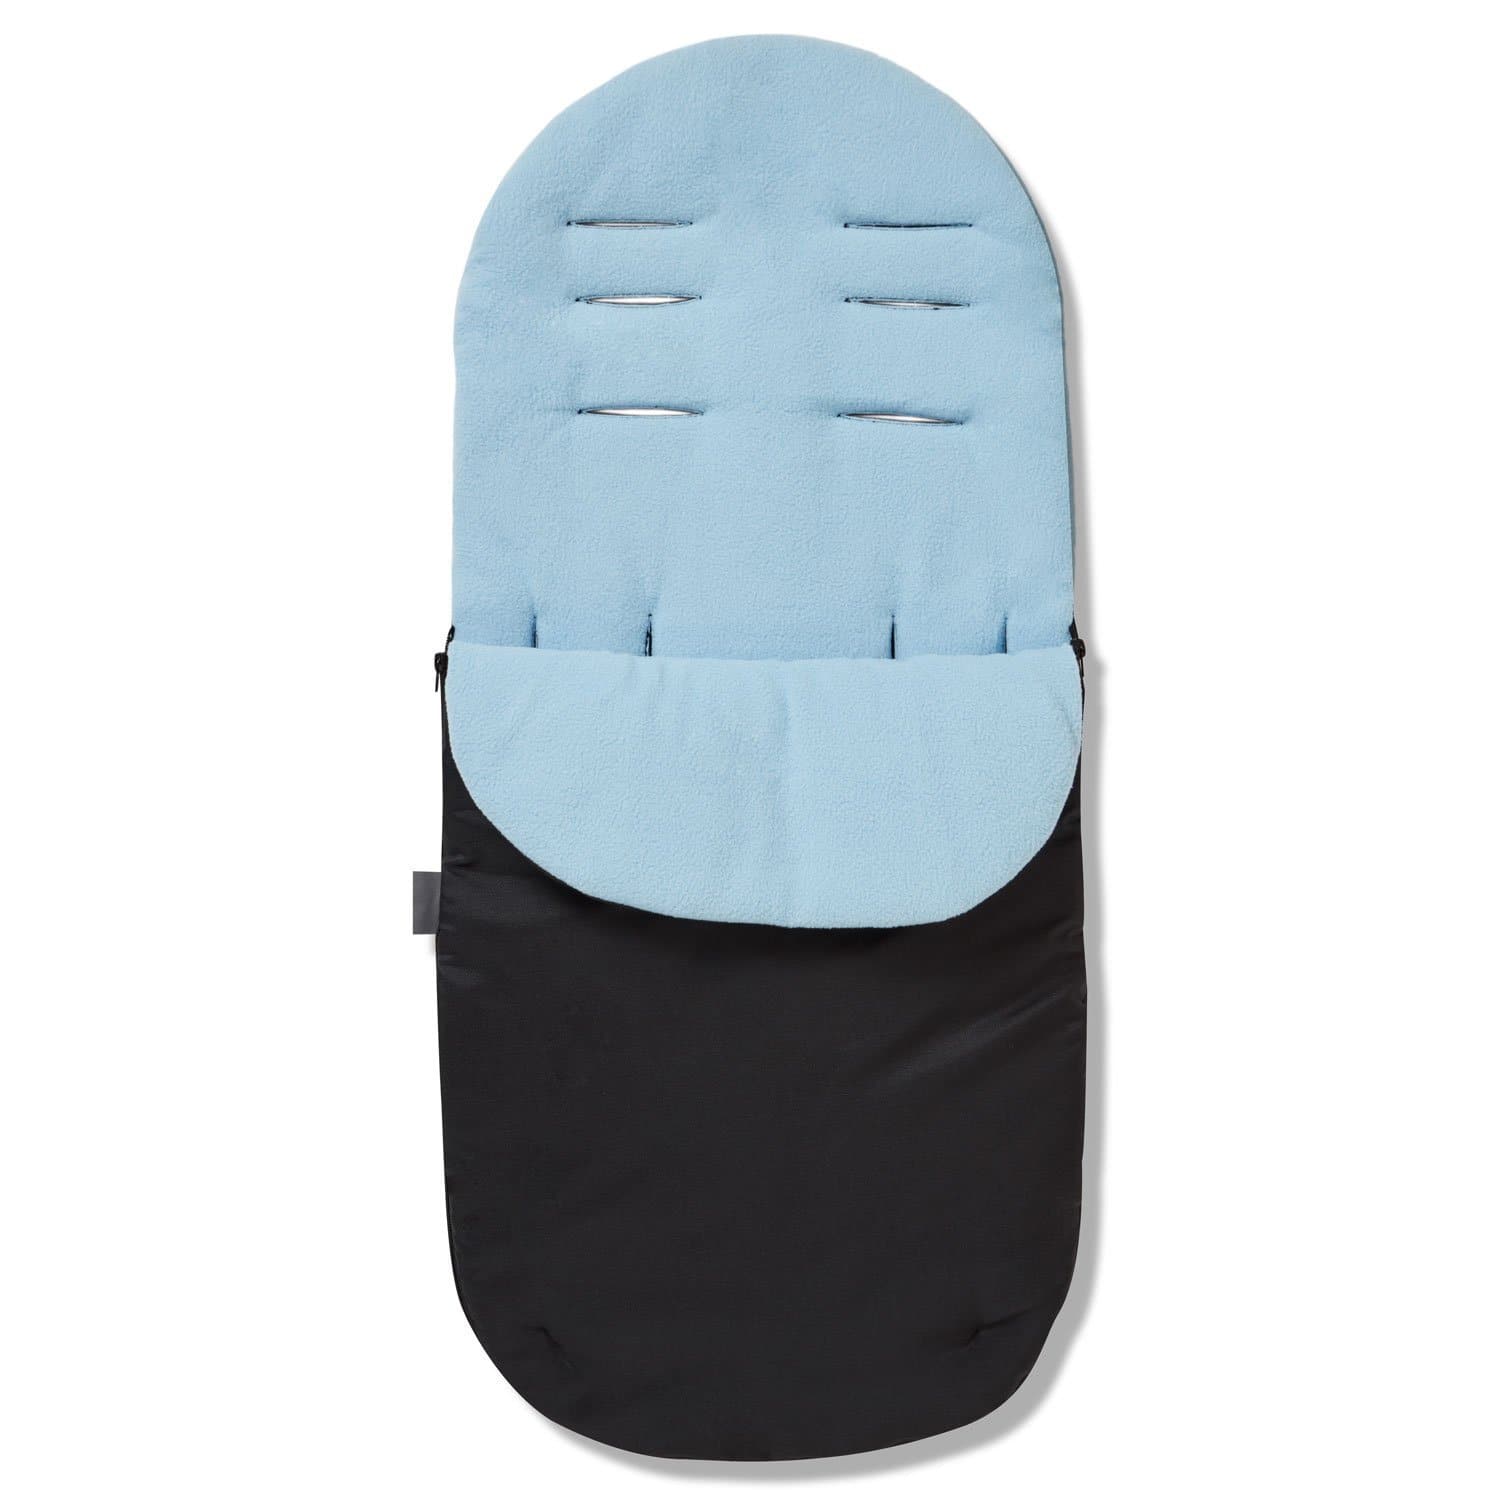 Footmuff / Cosy Toes Compatible with BabiesRus - Light Blue / Fits All Models | For Your Little One